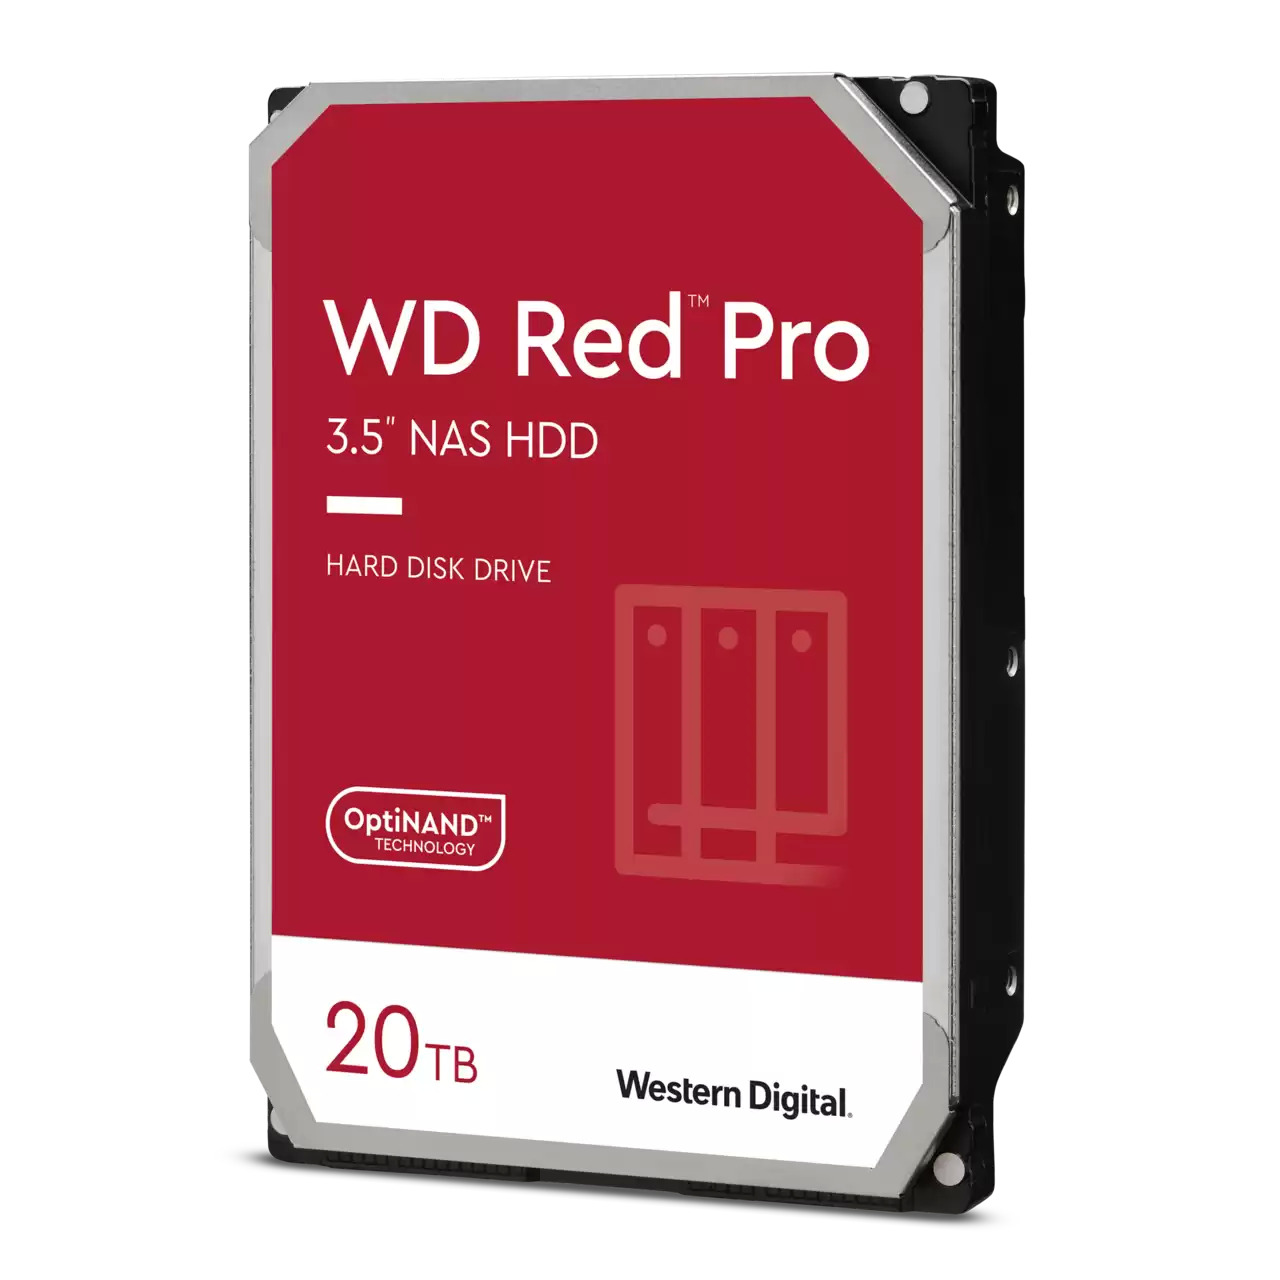 2x20TB Red Pro drives for $599.98 + Tax w/Free Shipping